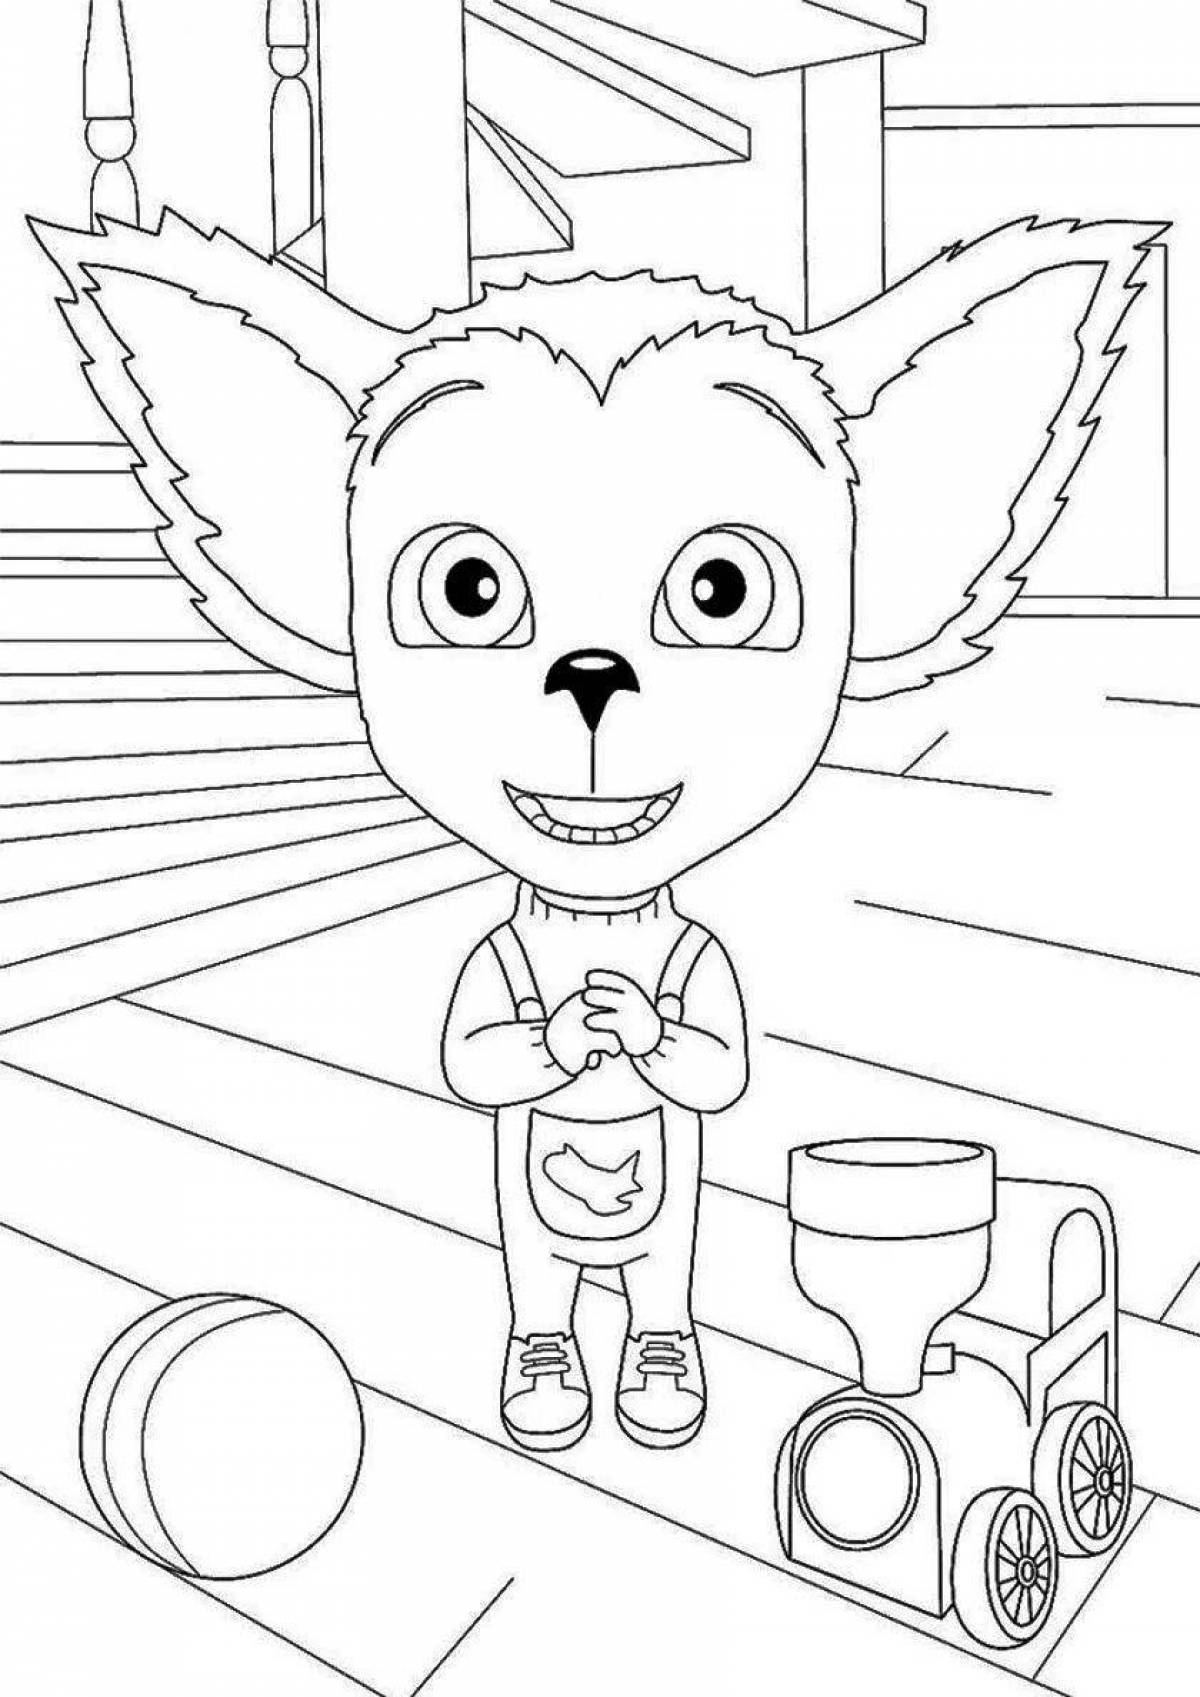 Funny barboskin coloring pages for girls